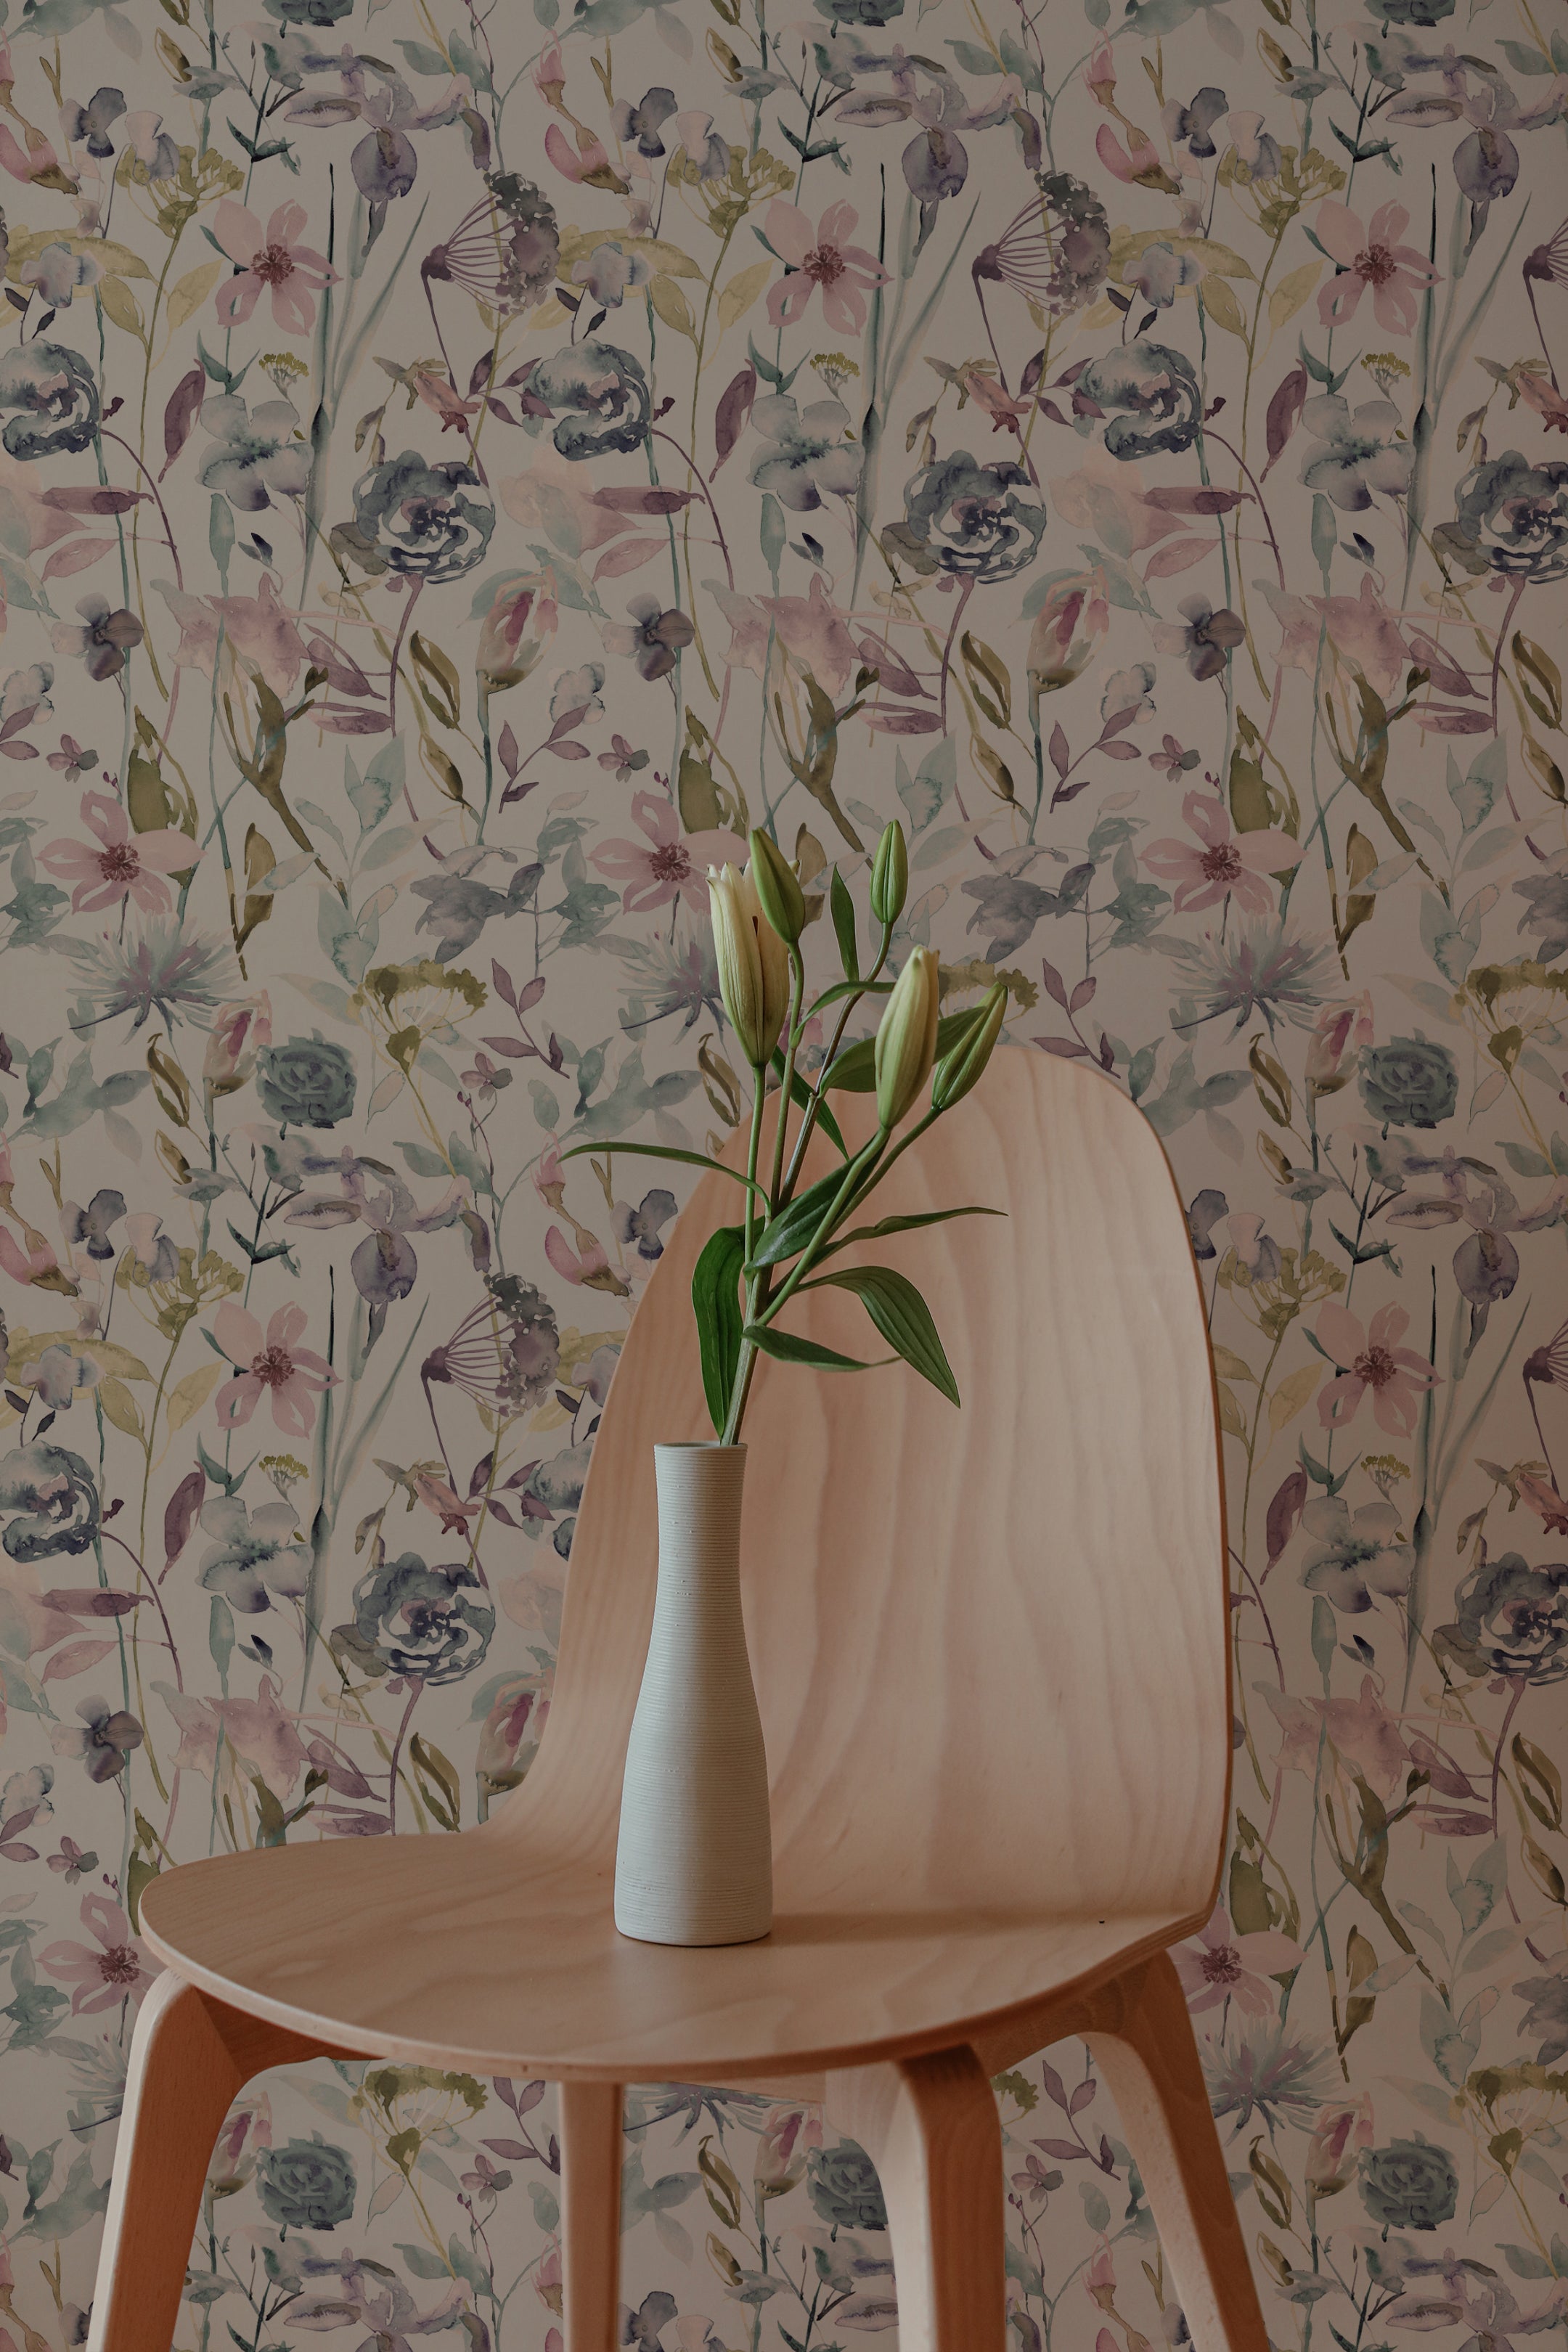 A minimalistic interior featuring a modern chair with a vase of fresh lilies on it. The background showcases the Watercolour Meadow Wallpaper, with its soft watercolor floral pattern in shades of pink, blue, and green, giving a serene and artistic touch to the space.